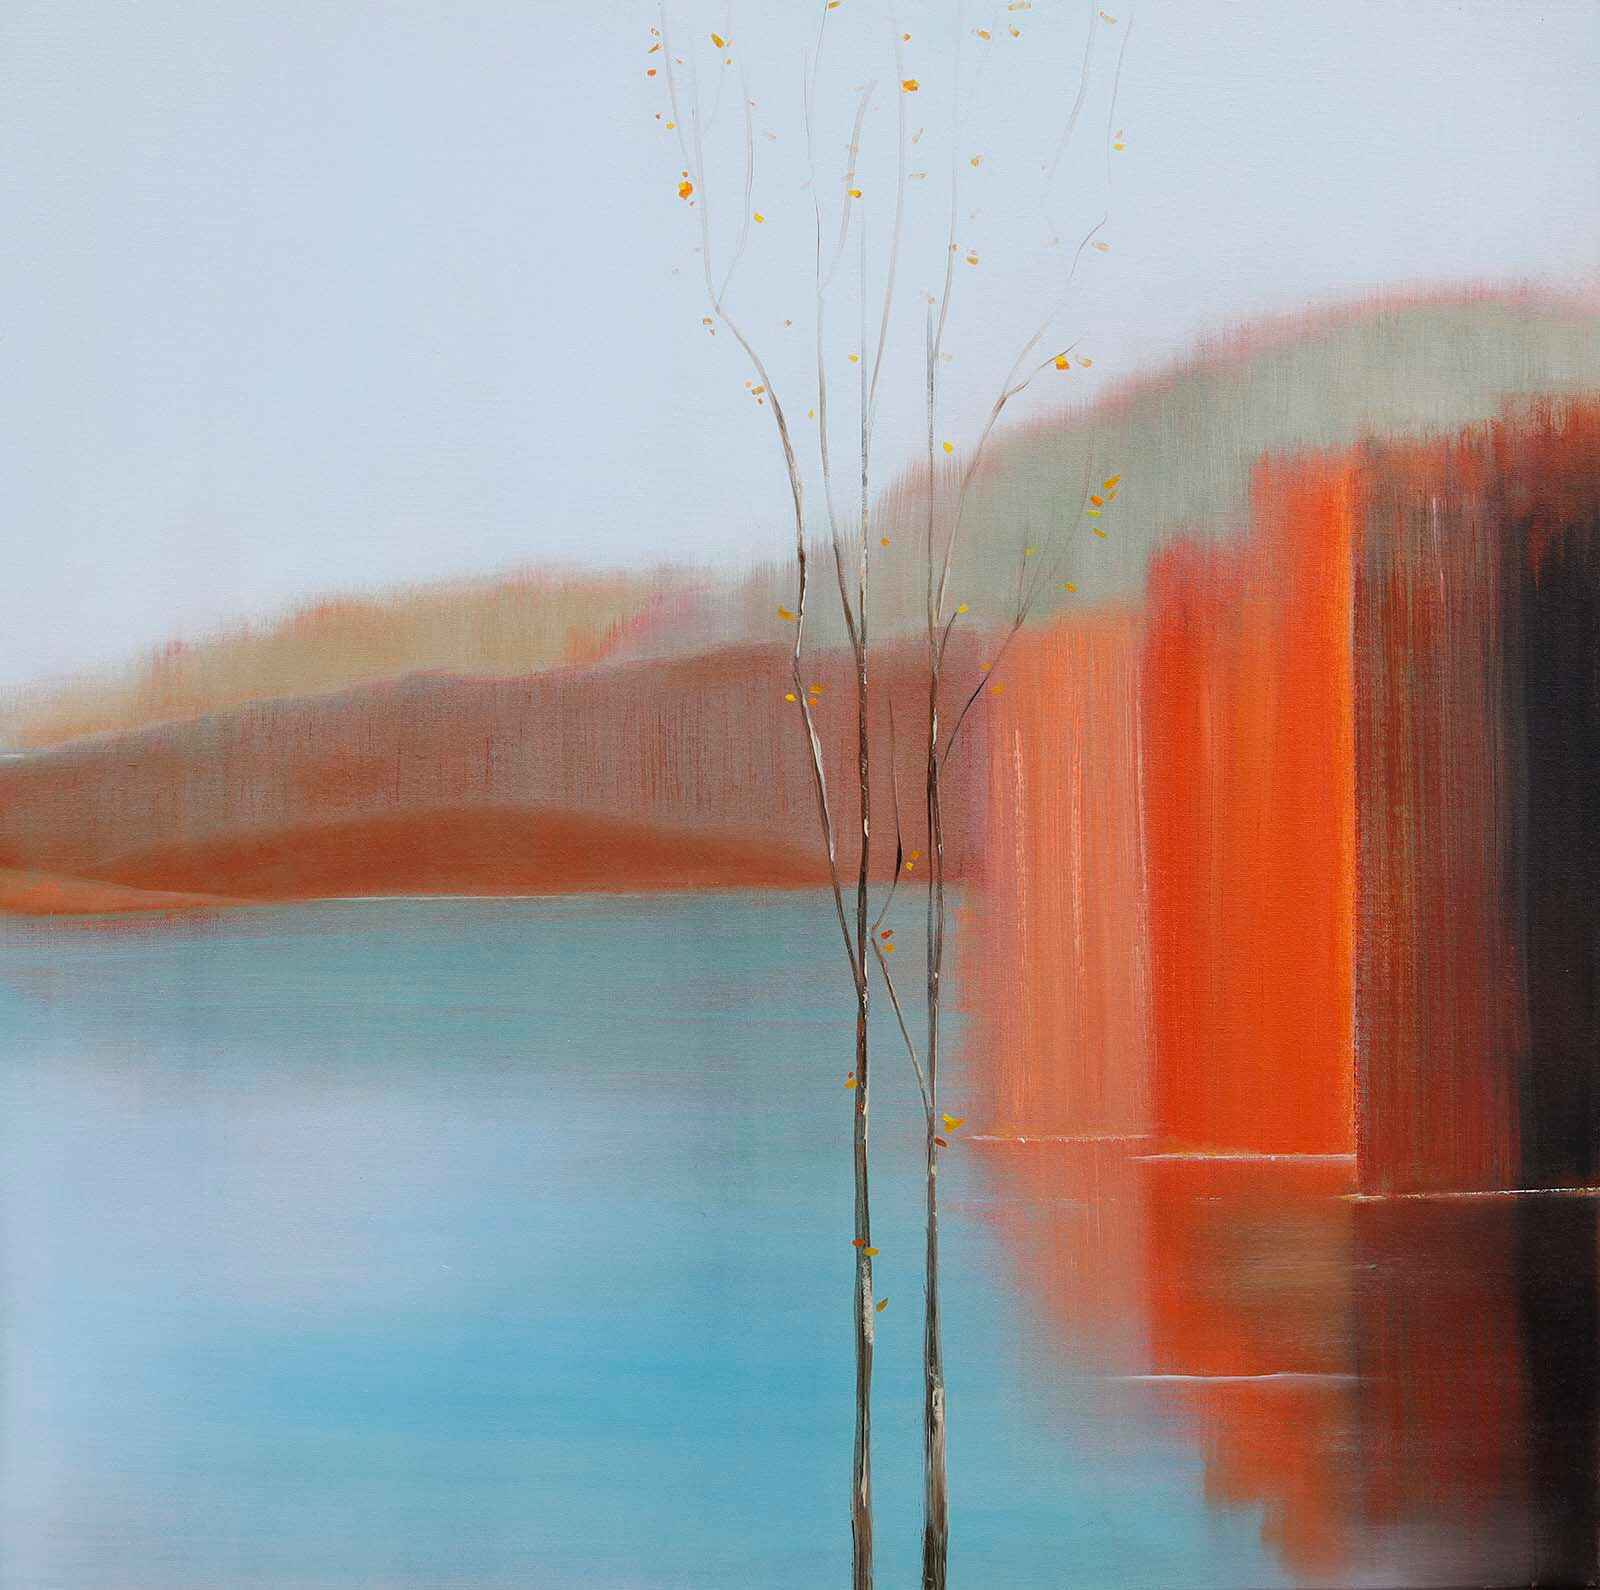 Contemporary art. Title: Journey to Peace Ⅱ, Oil on Canvas, 30 x 30 in by Canadian artist Katherine van Kampen.